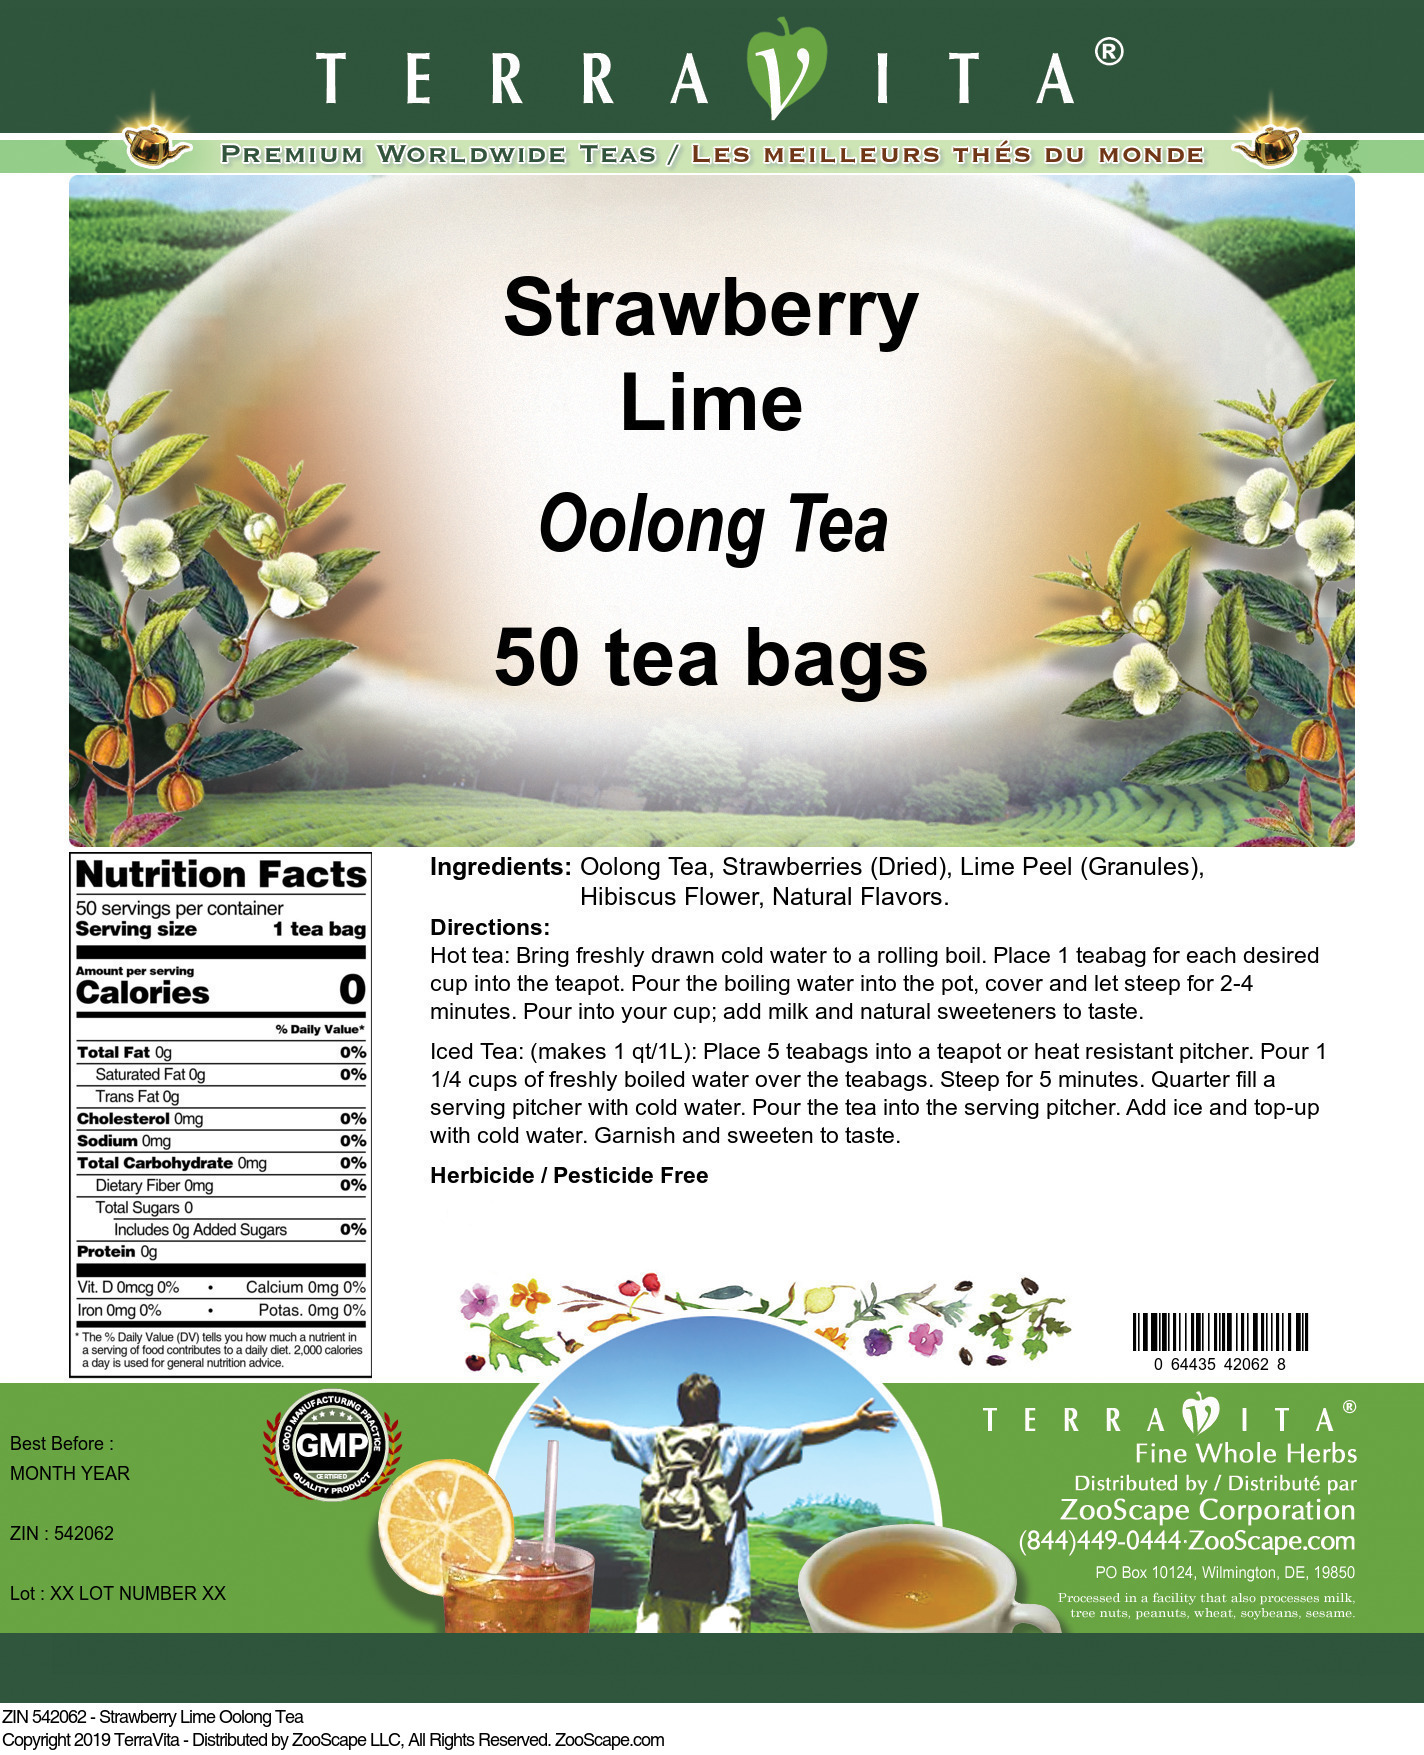 Strawberry Lime Oolong Tea - Label